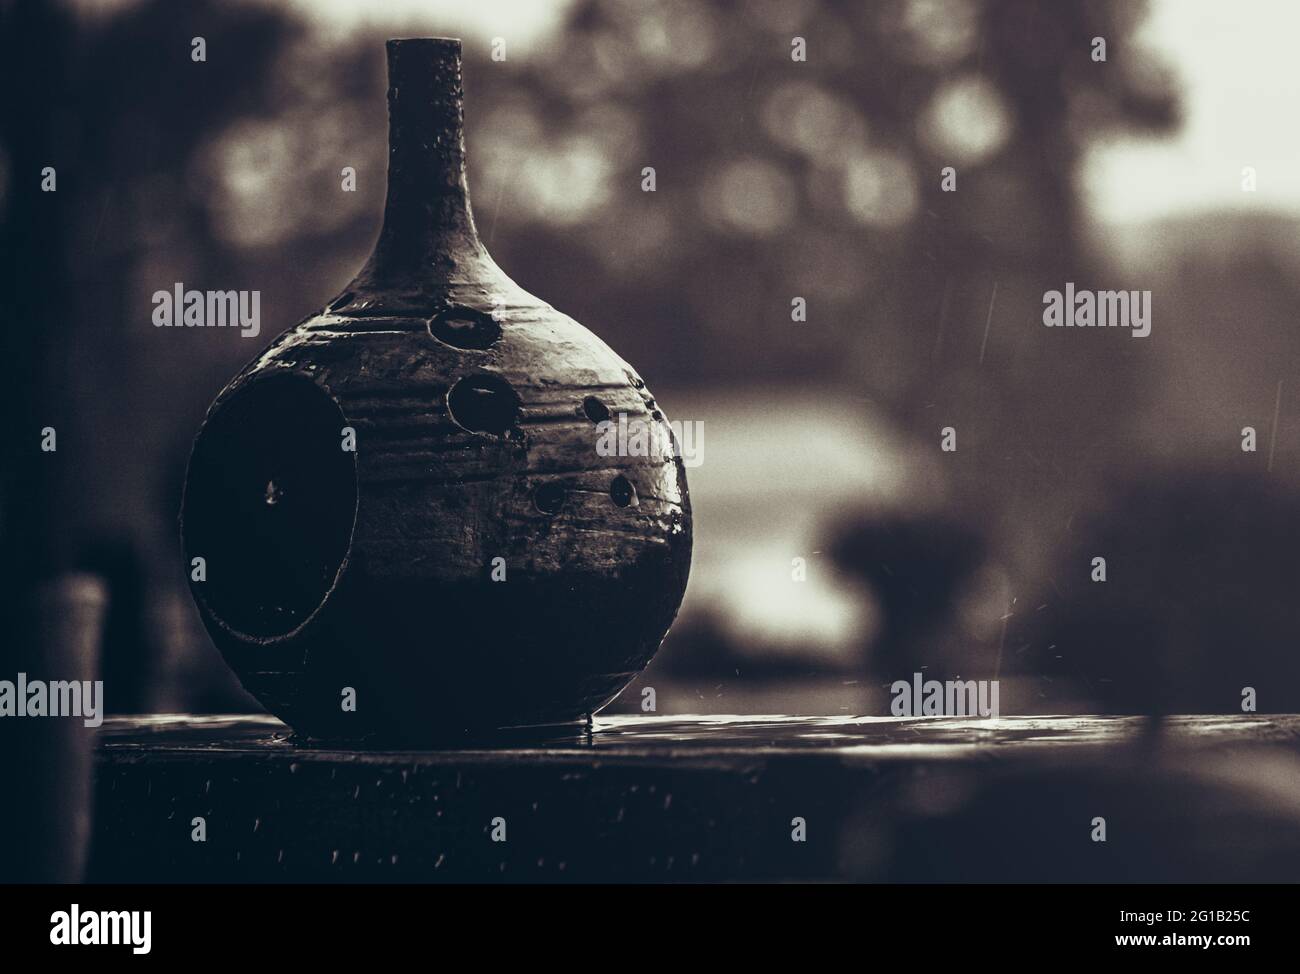 Close-up of a vase as a decorative tea light holder in still life style. Melancholy mood camera obscura decoration as a vase. Bowling Ball Surreal. Stock Photo